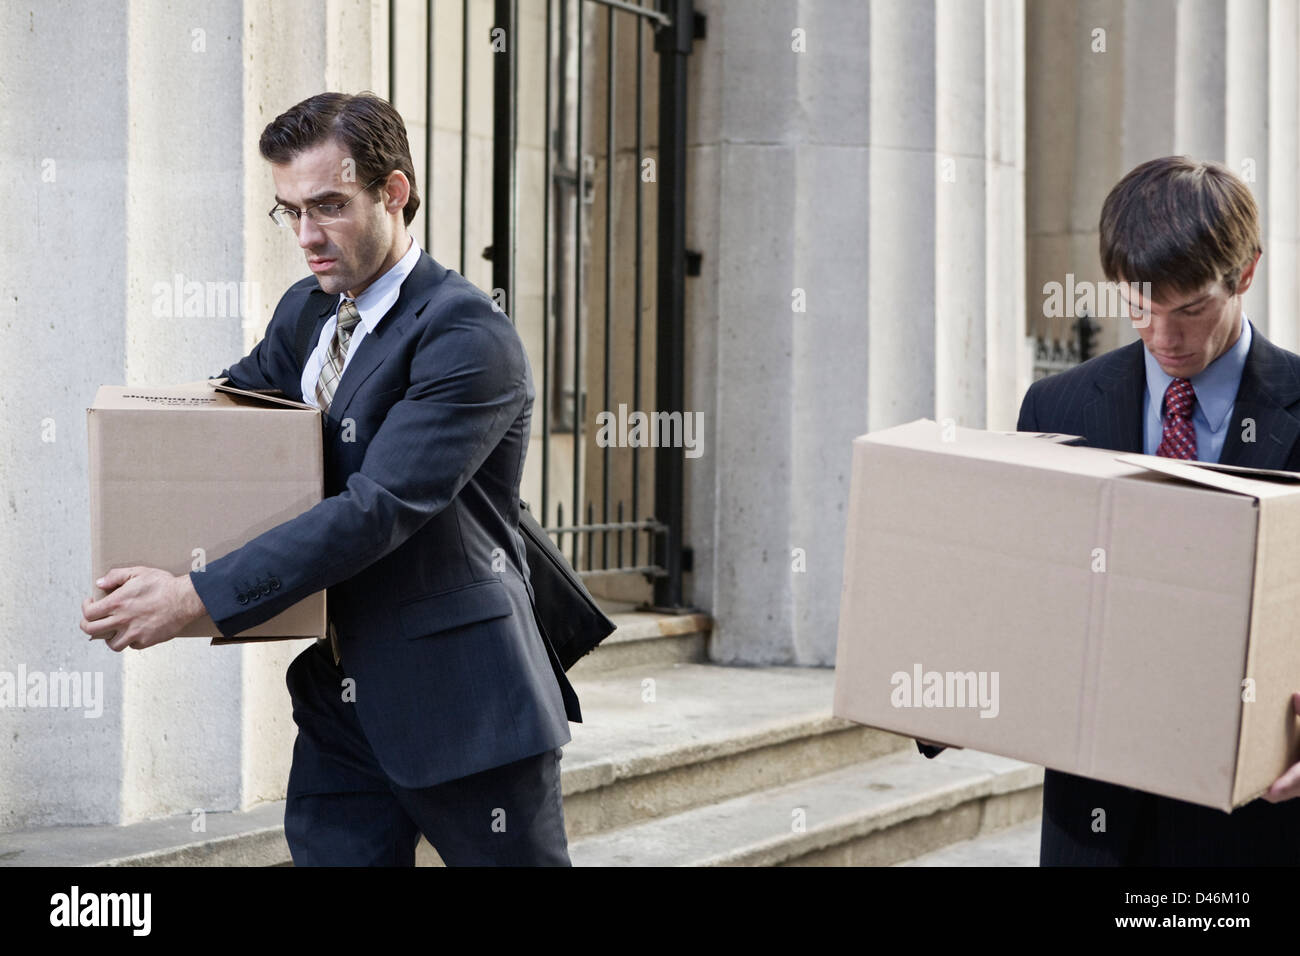 Two wall street men made redundant, carrying boxes of personal effects from work. Stock Photo